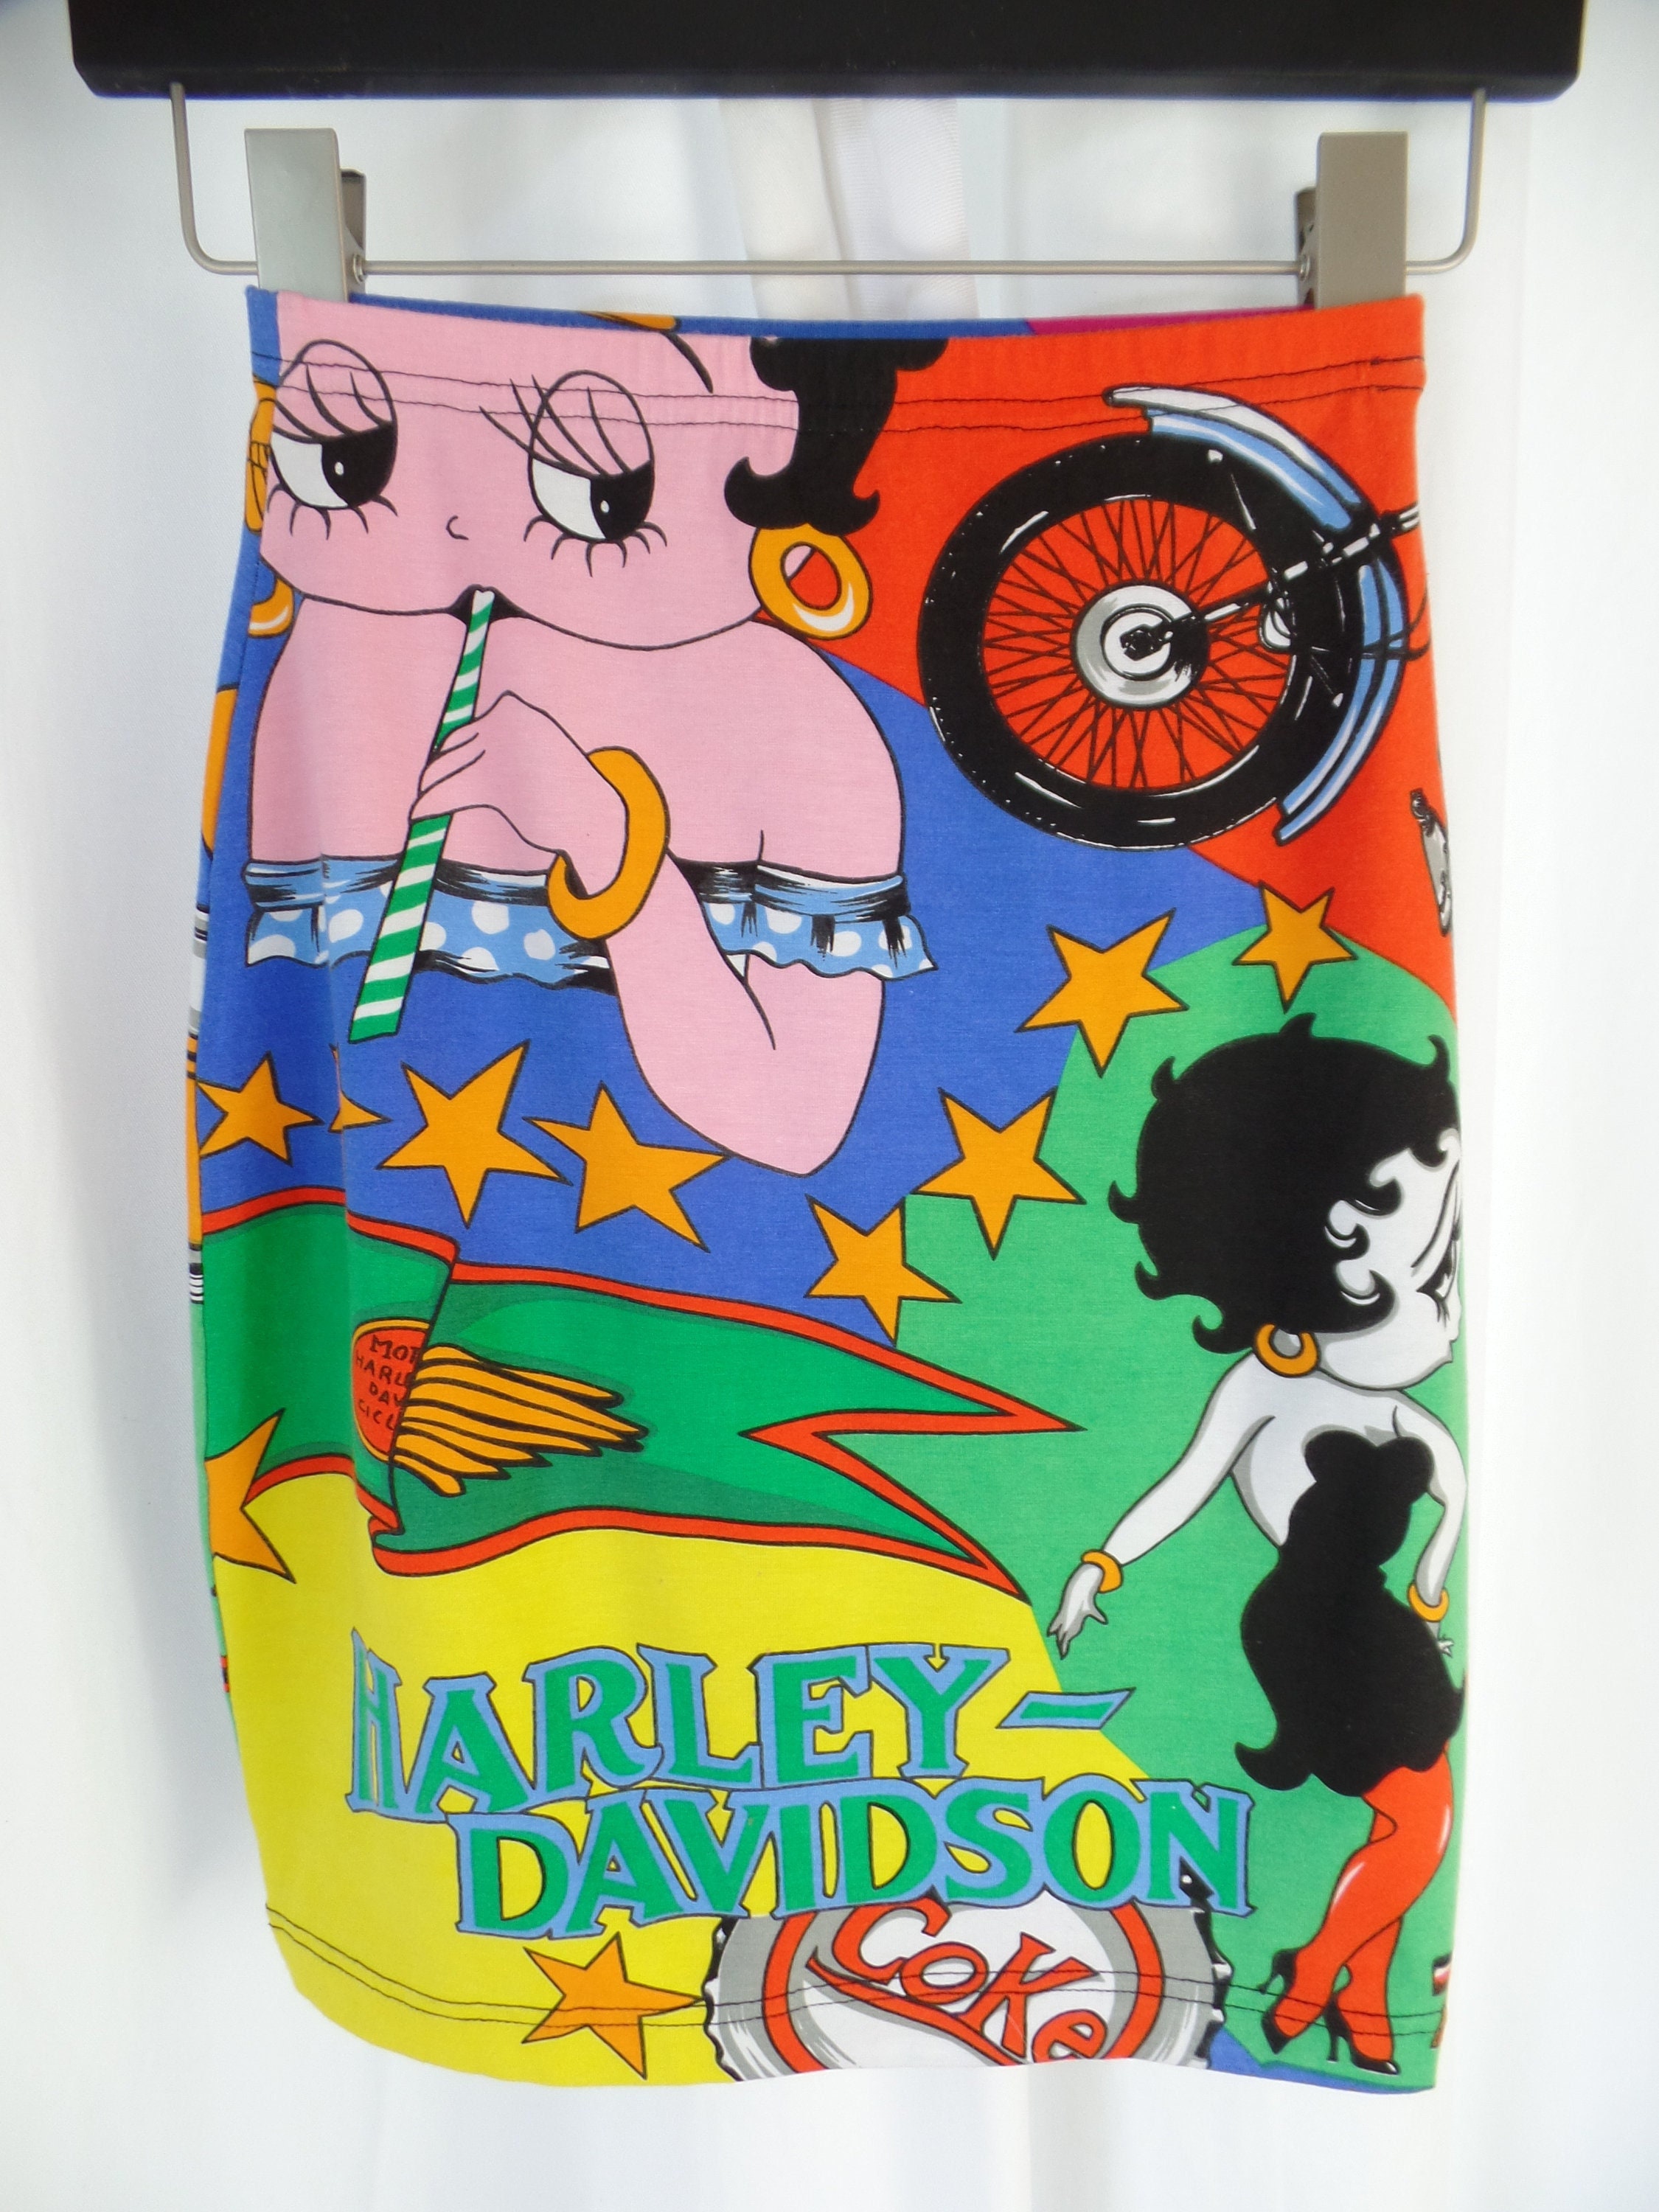 1991 S/S VERSACE Betty Boop Harley Davidson Tube Skirt/metropolitan Museum  of Art in NYC / Made in Italy: Size IT 26/40 